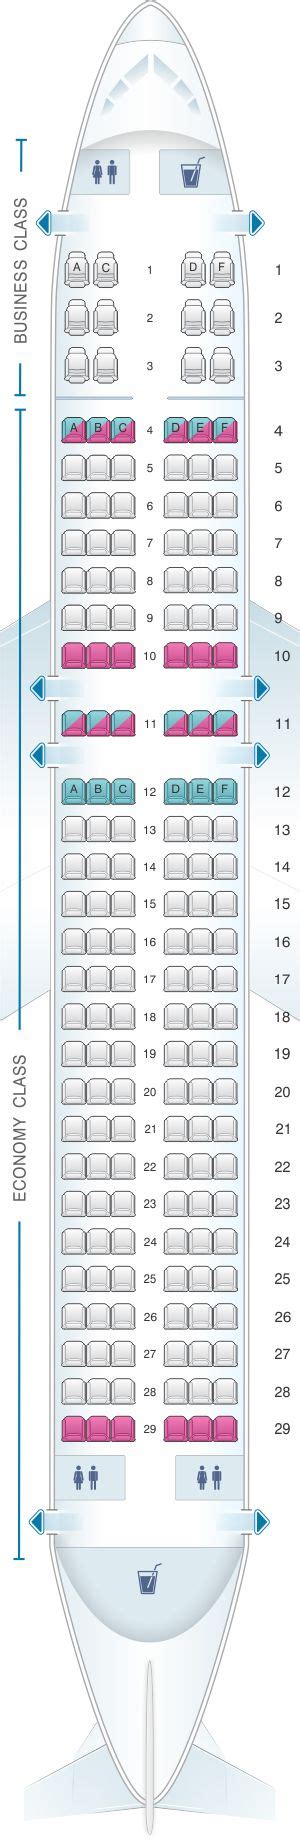 Seat Map Brussels Airlines Airbus A320 Air Transat Malaysia Airlines